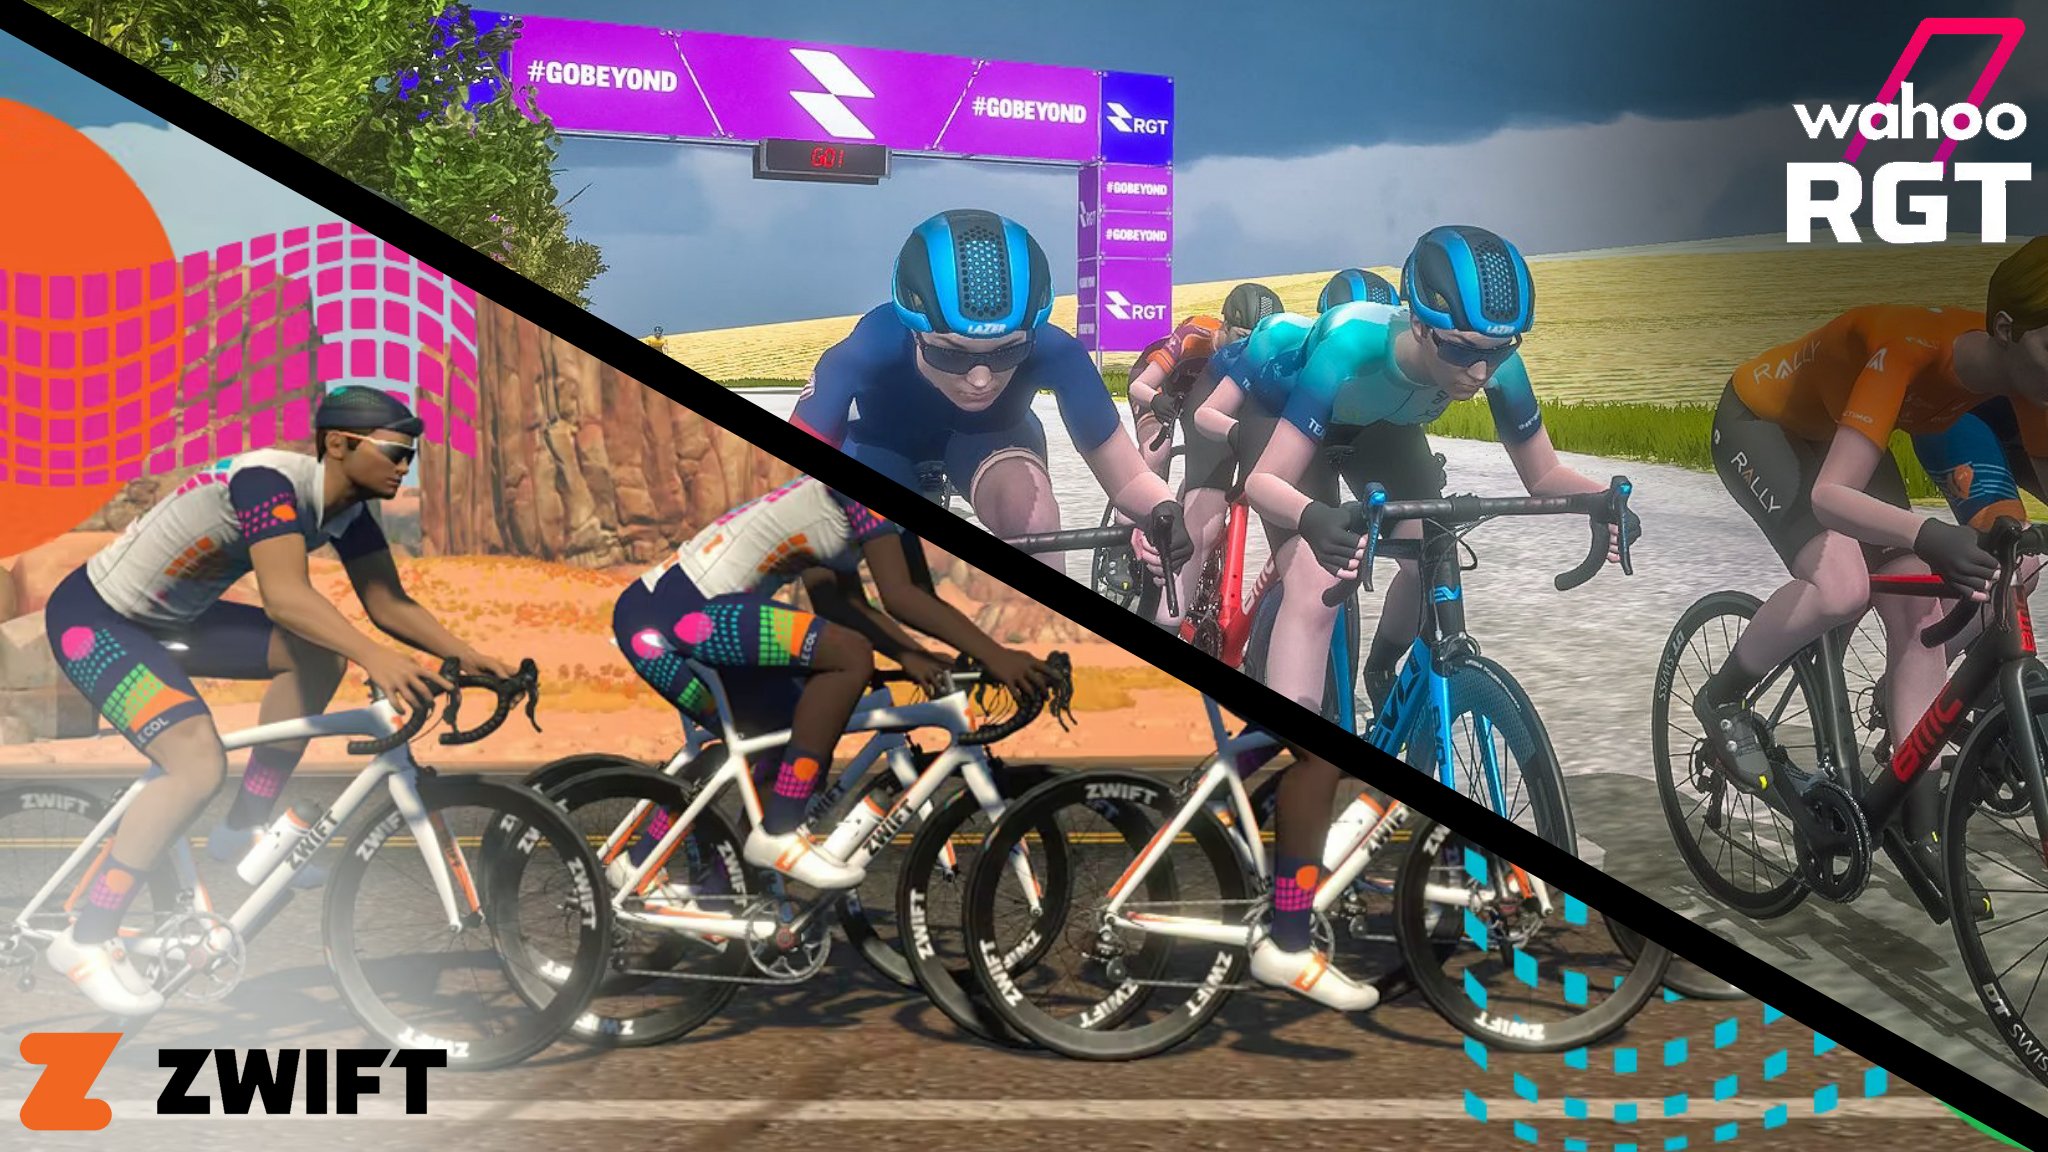 Wahoo RGT vs Zwift Which platform is better? Cyclingnews